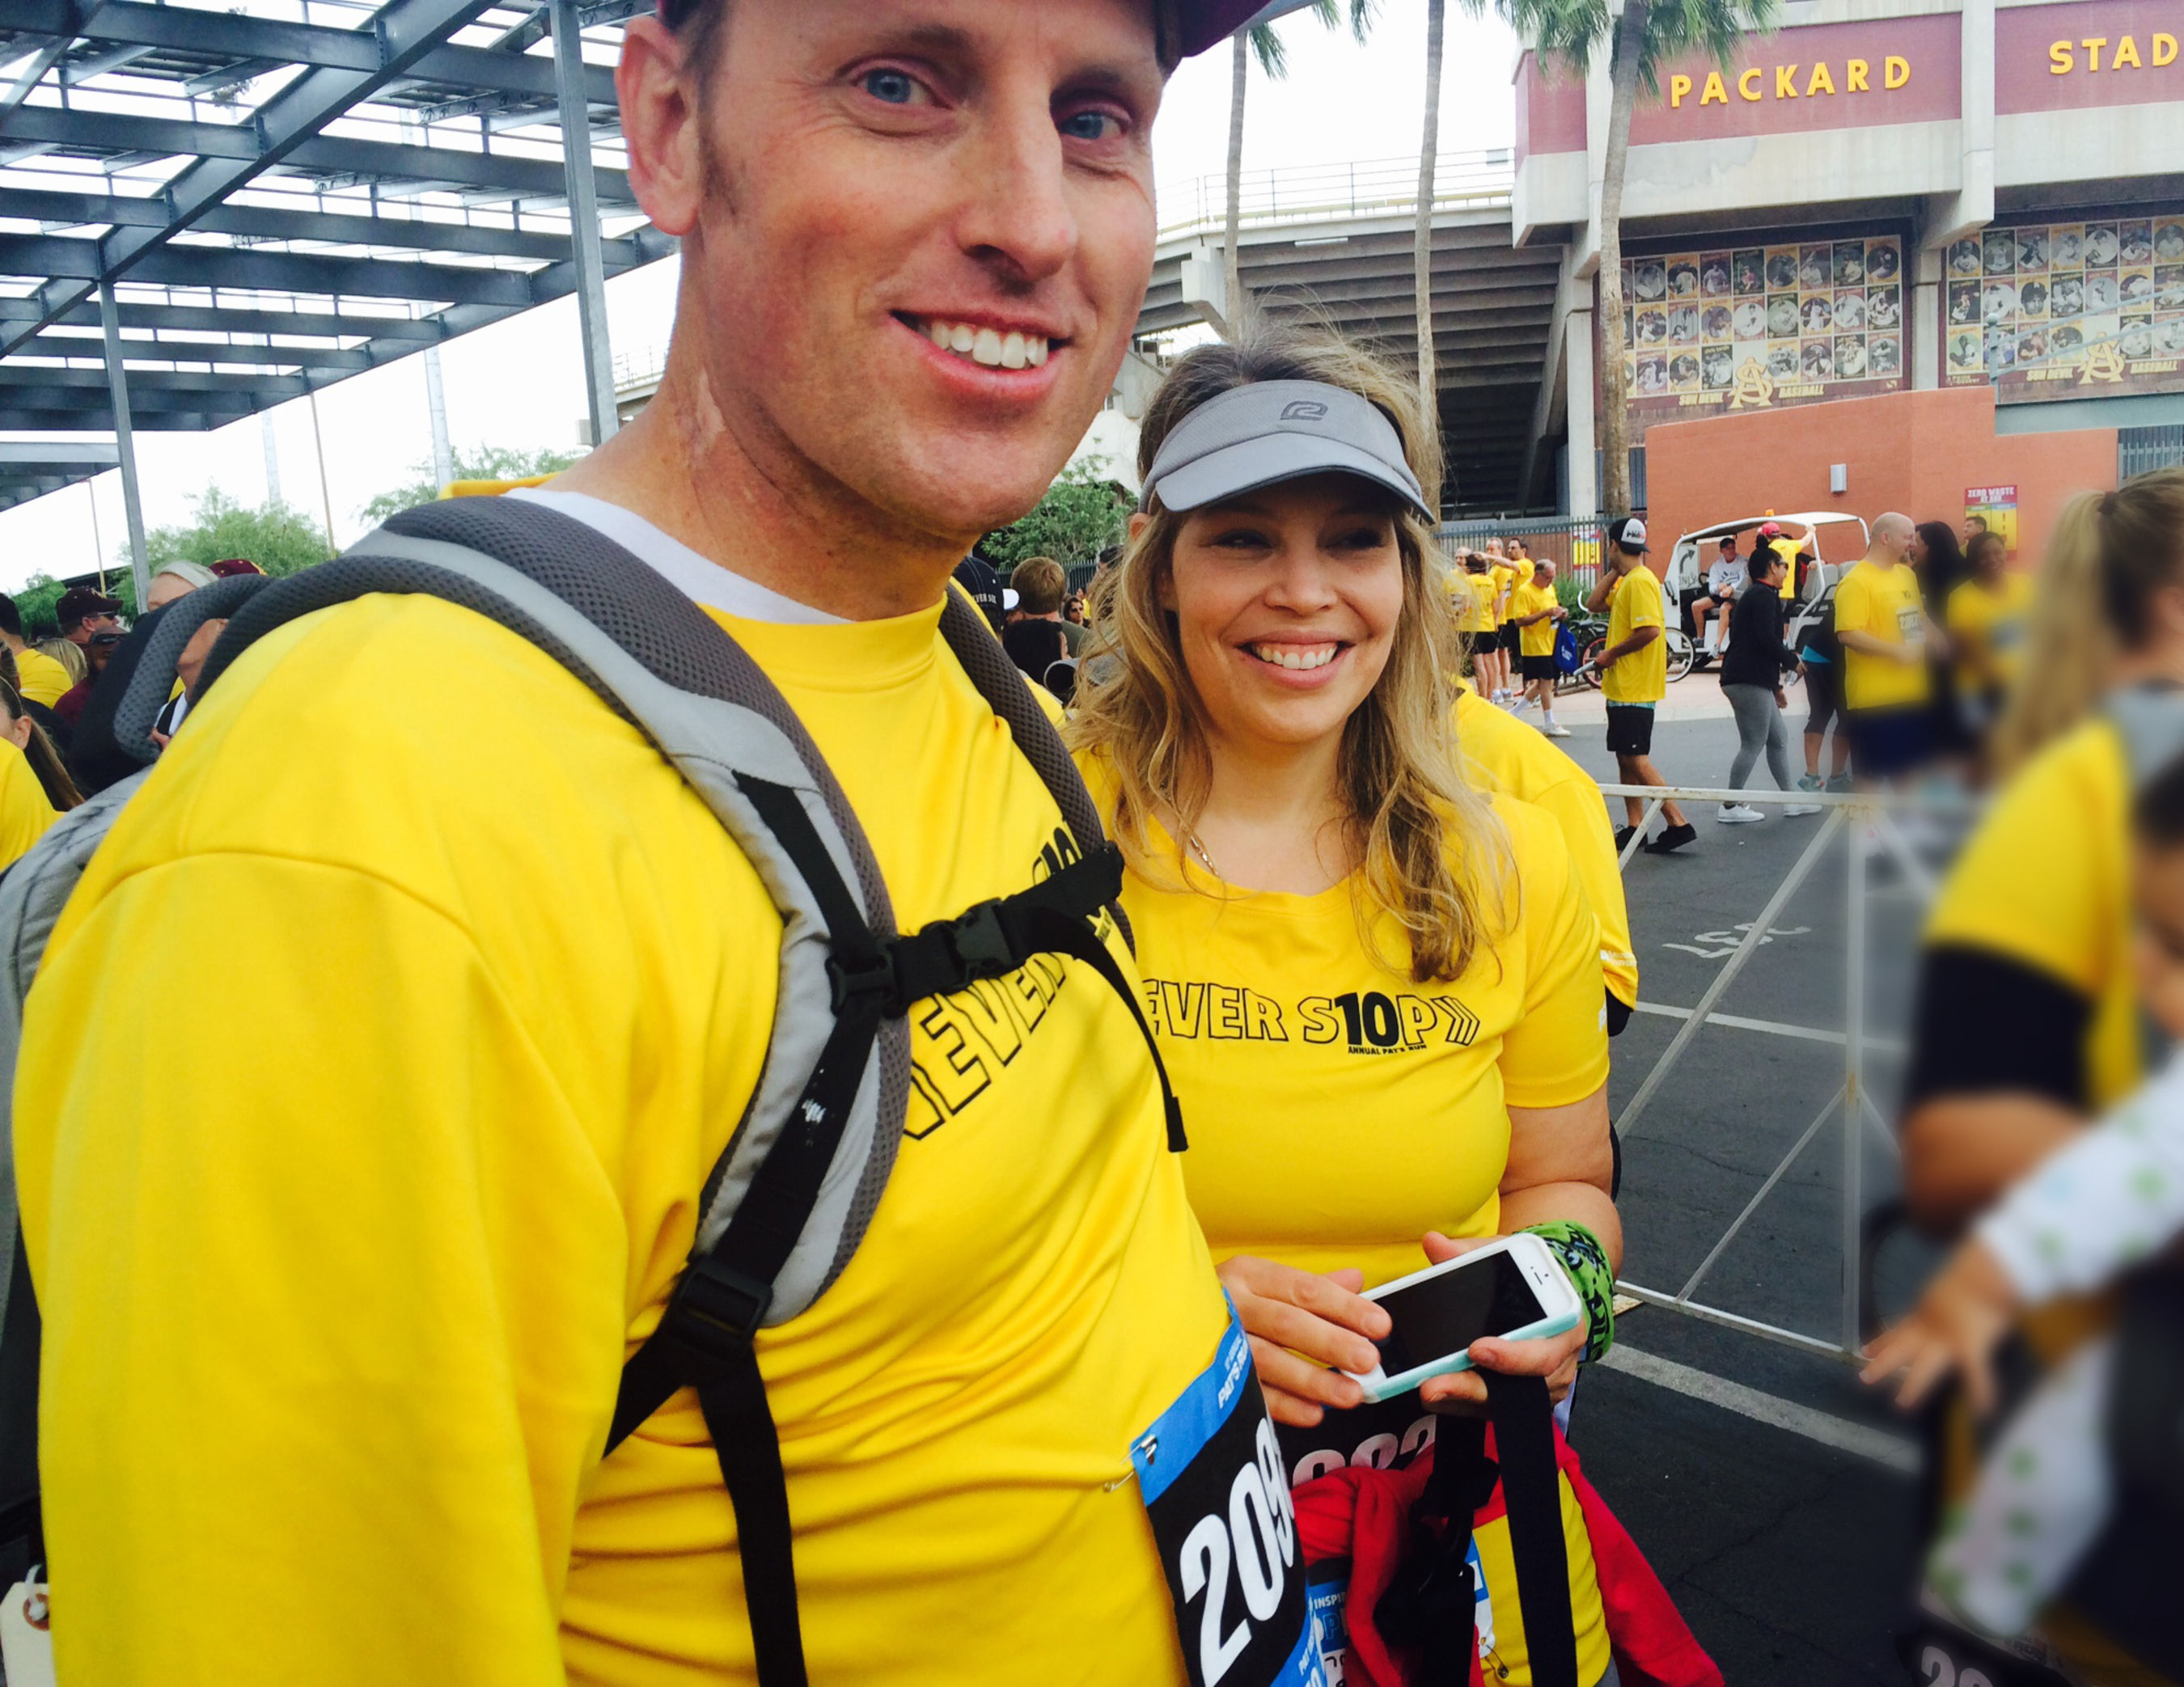 Randy and Tiffany Shepherd share smiles before walking in Pat's Run. Randy made history that day by becoming the first SynCardia Total Artificial Heart patient to enter and complete the 4.2-mile course. (PRNewsFoto/SynCardia Systems, Inc.)